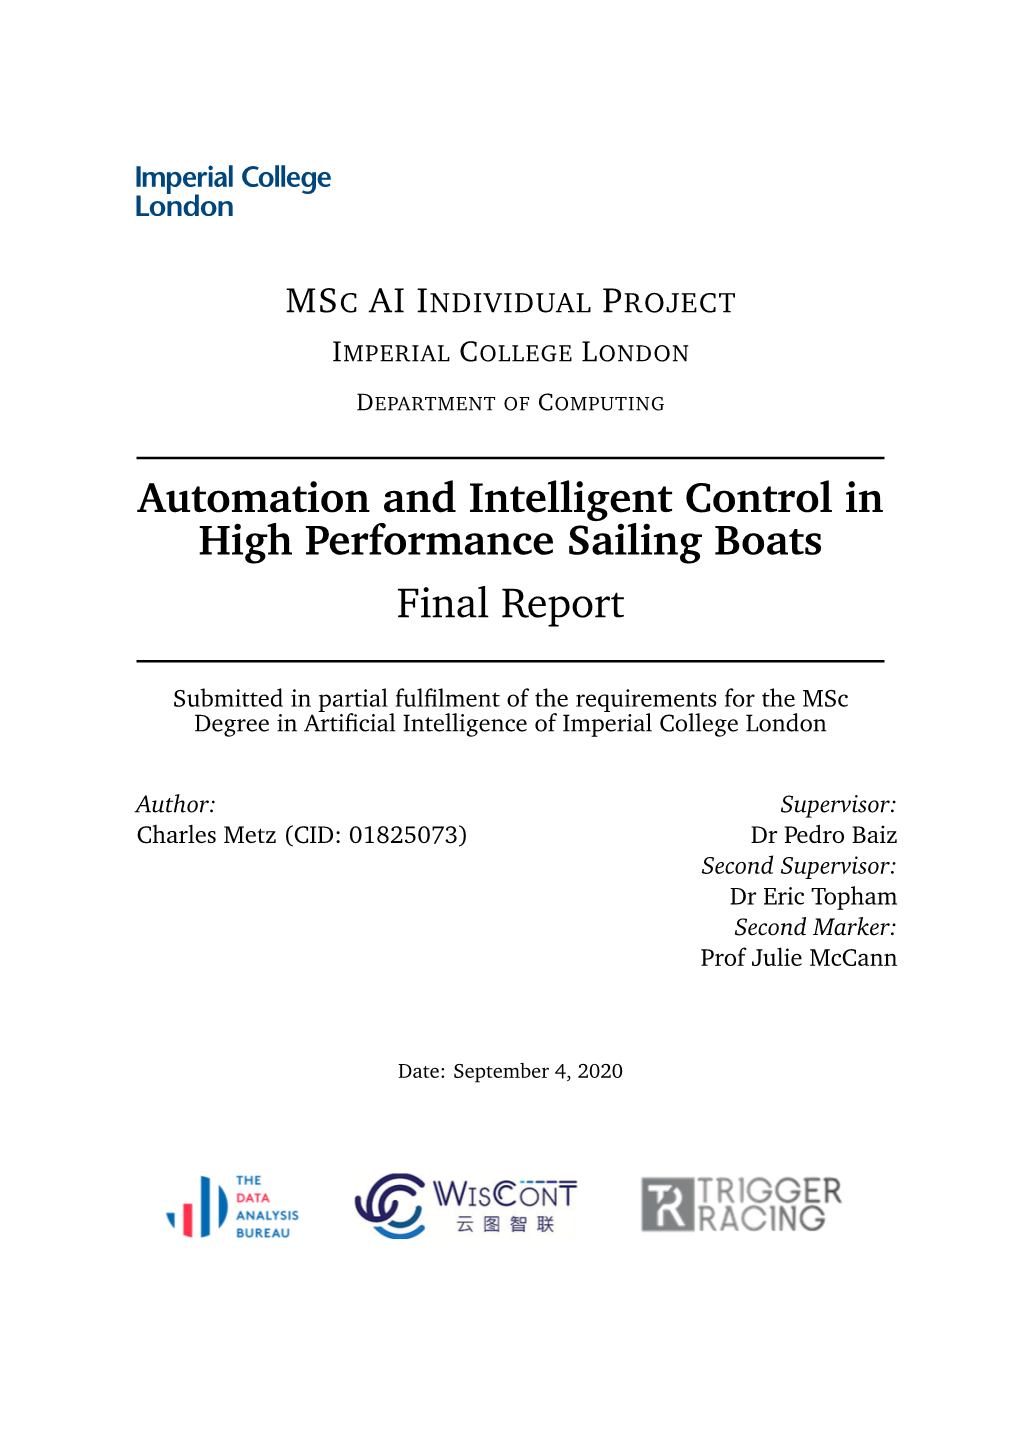 Automation and Intelligent Optimisation in High Performance Sailing Boats, 2019